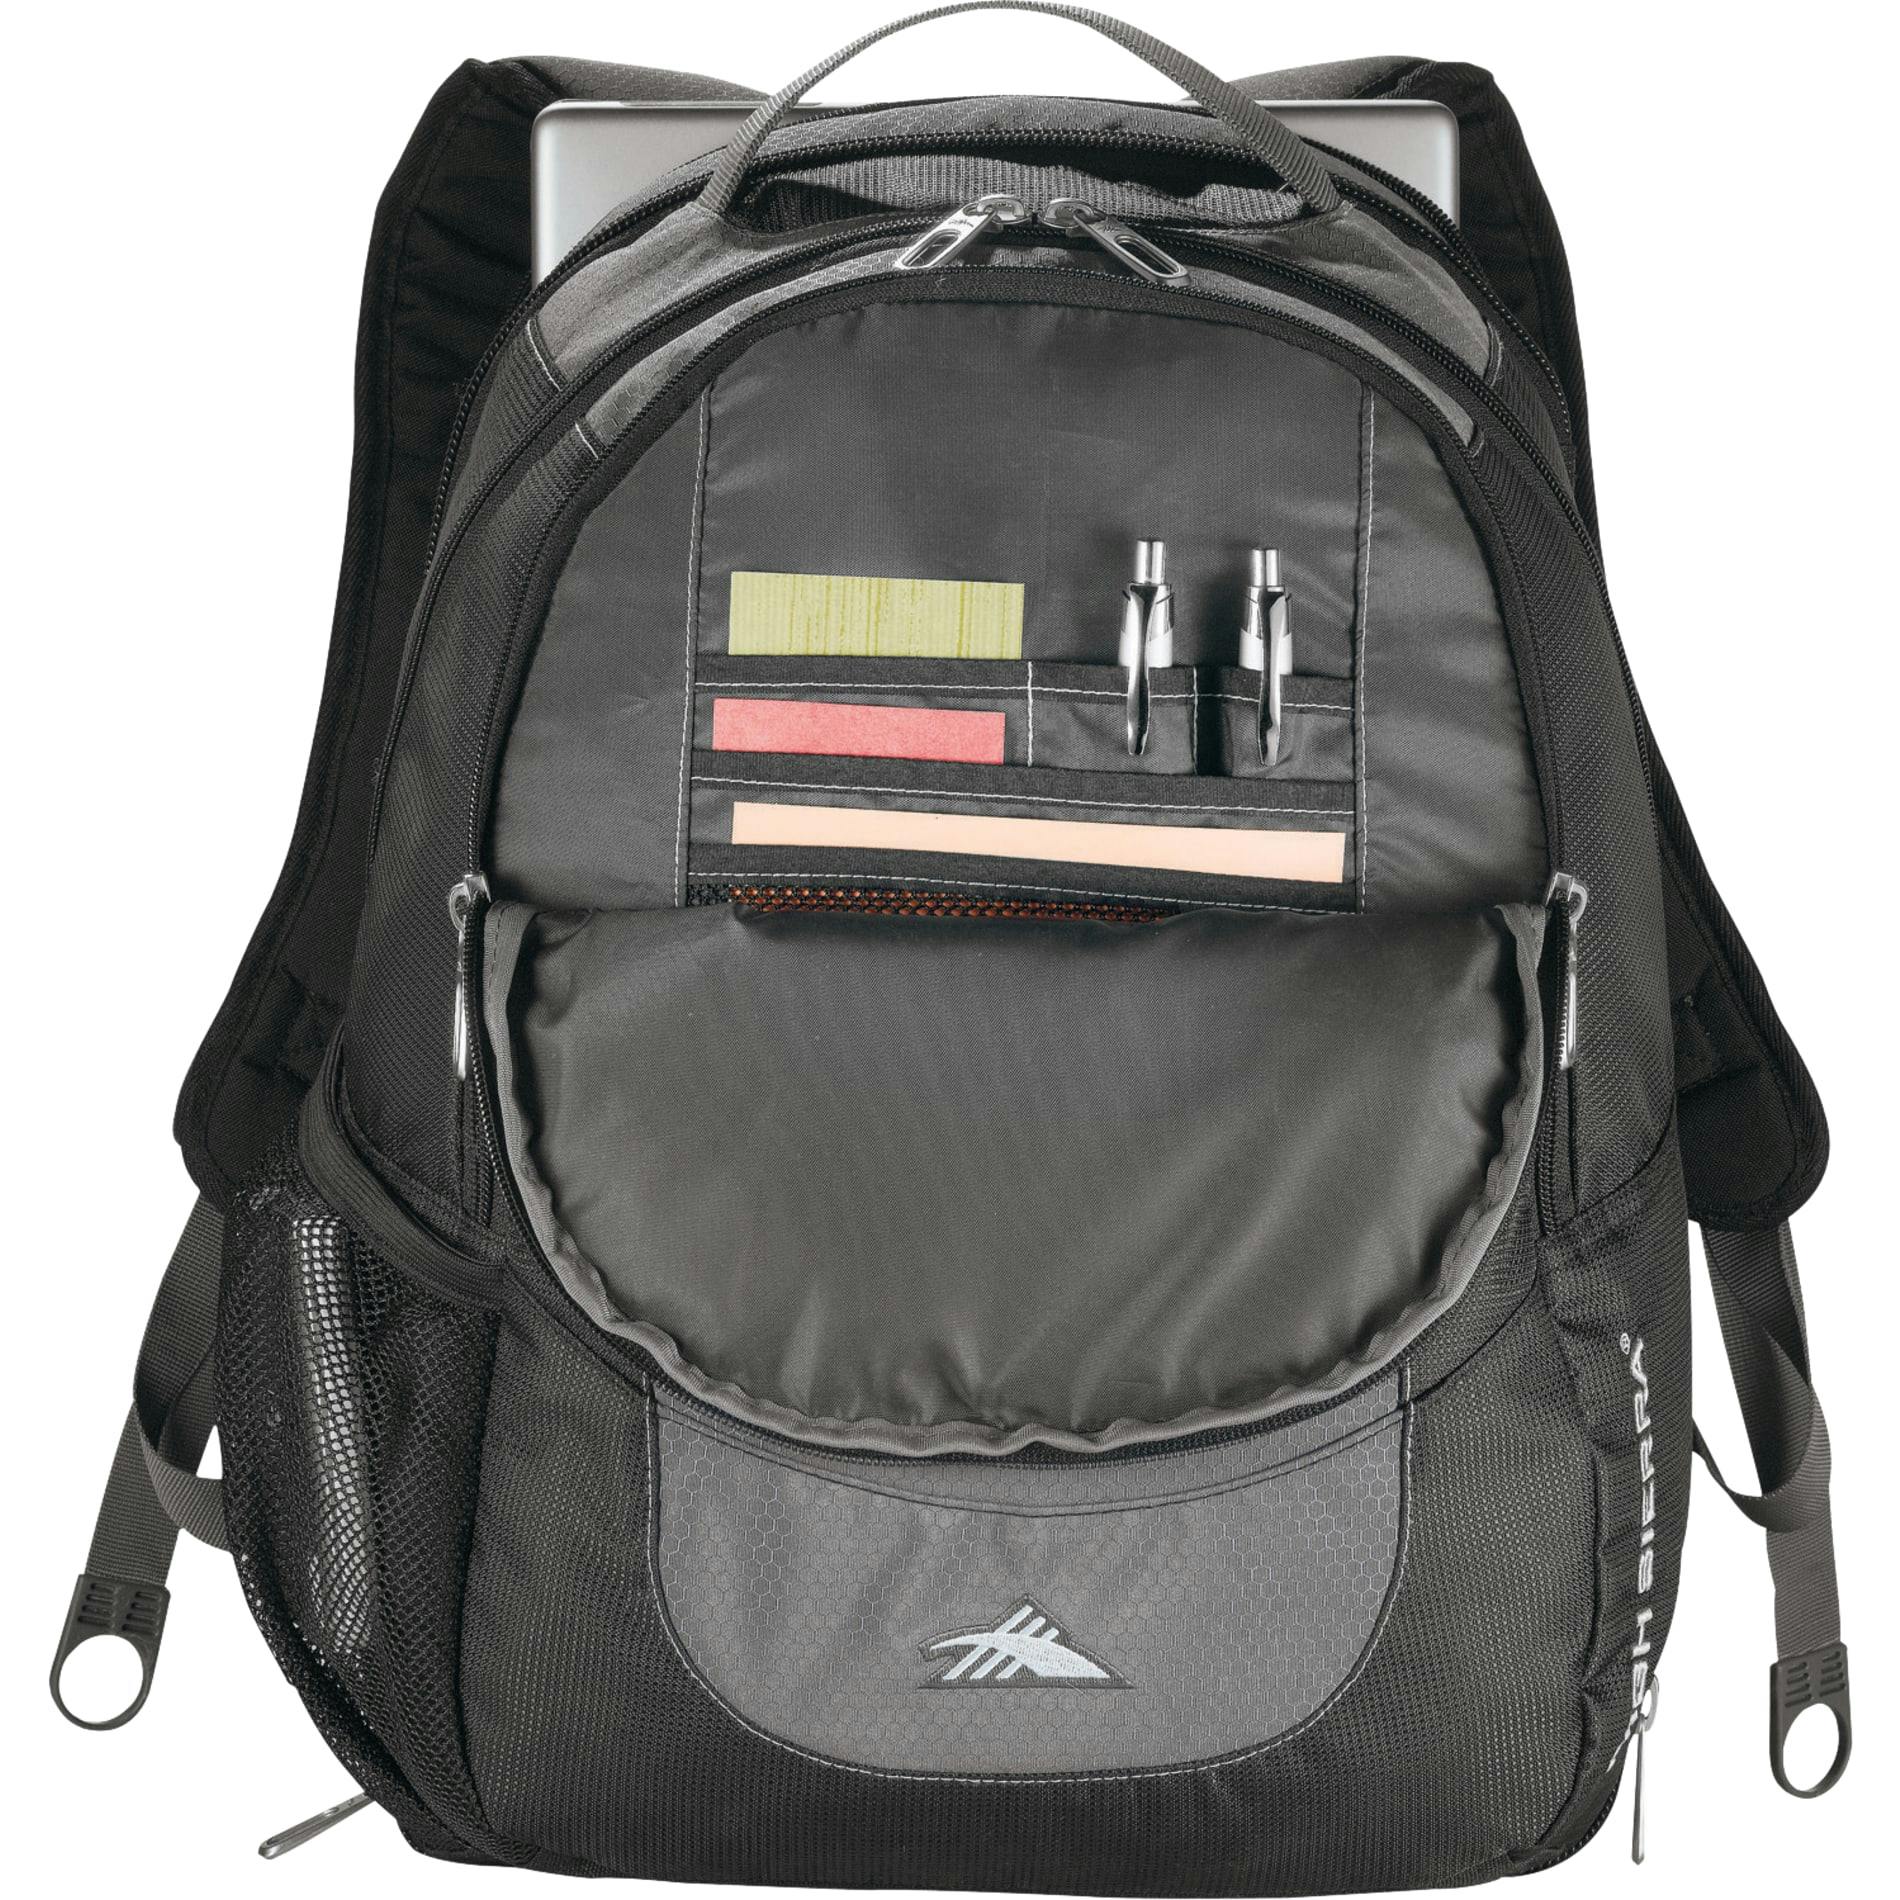 High Sierra Fly-By 17" Computer Backpack - additional Image 1